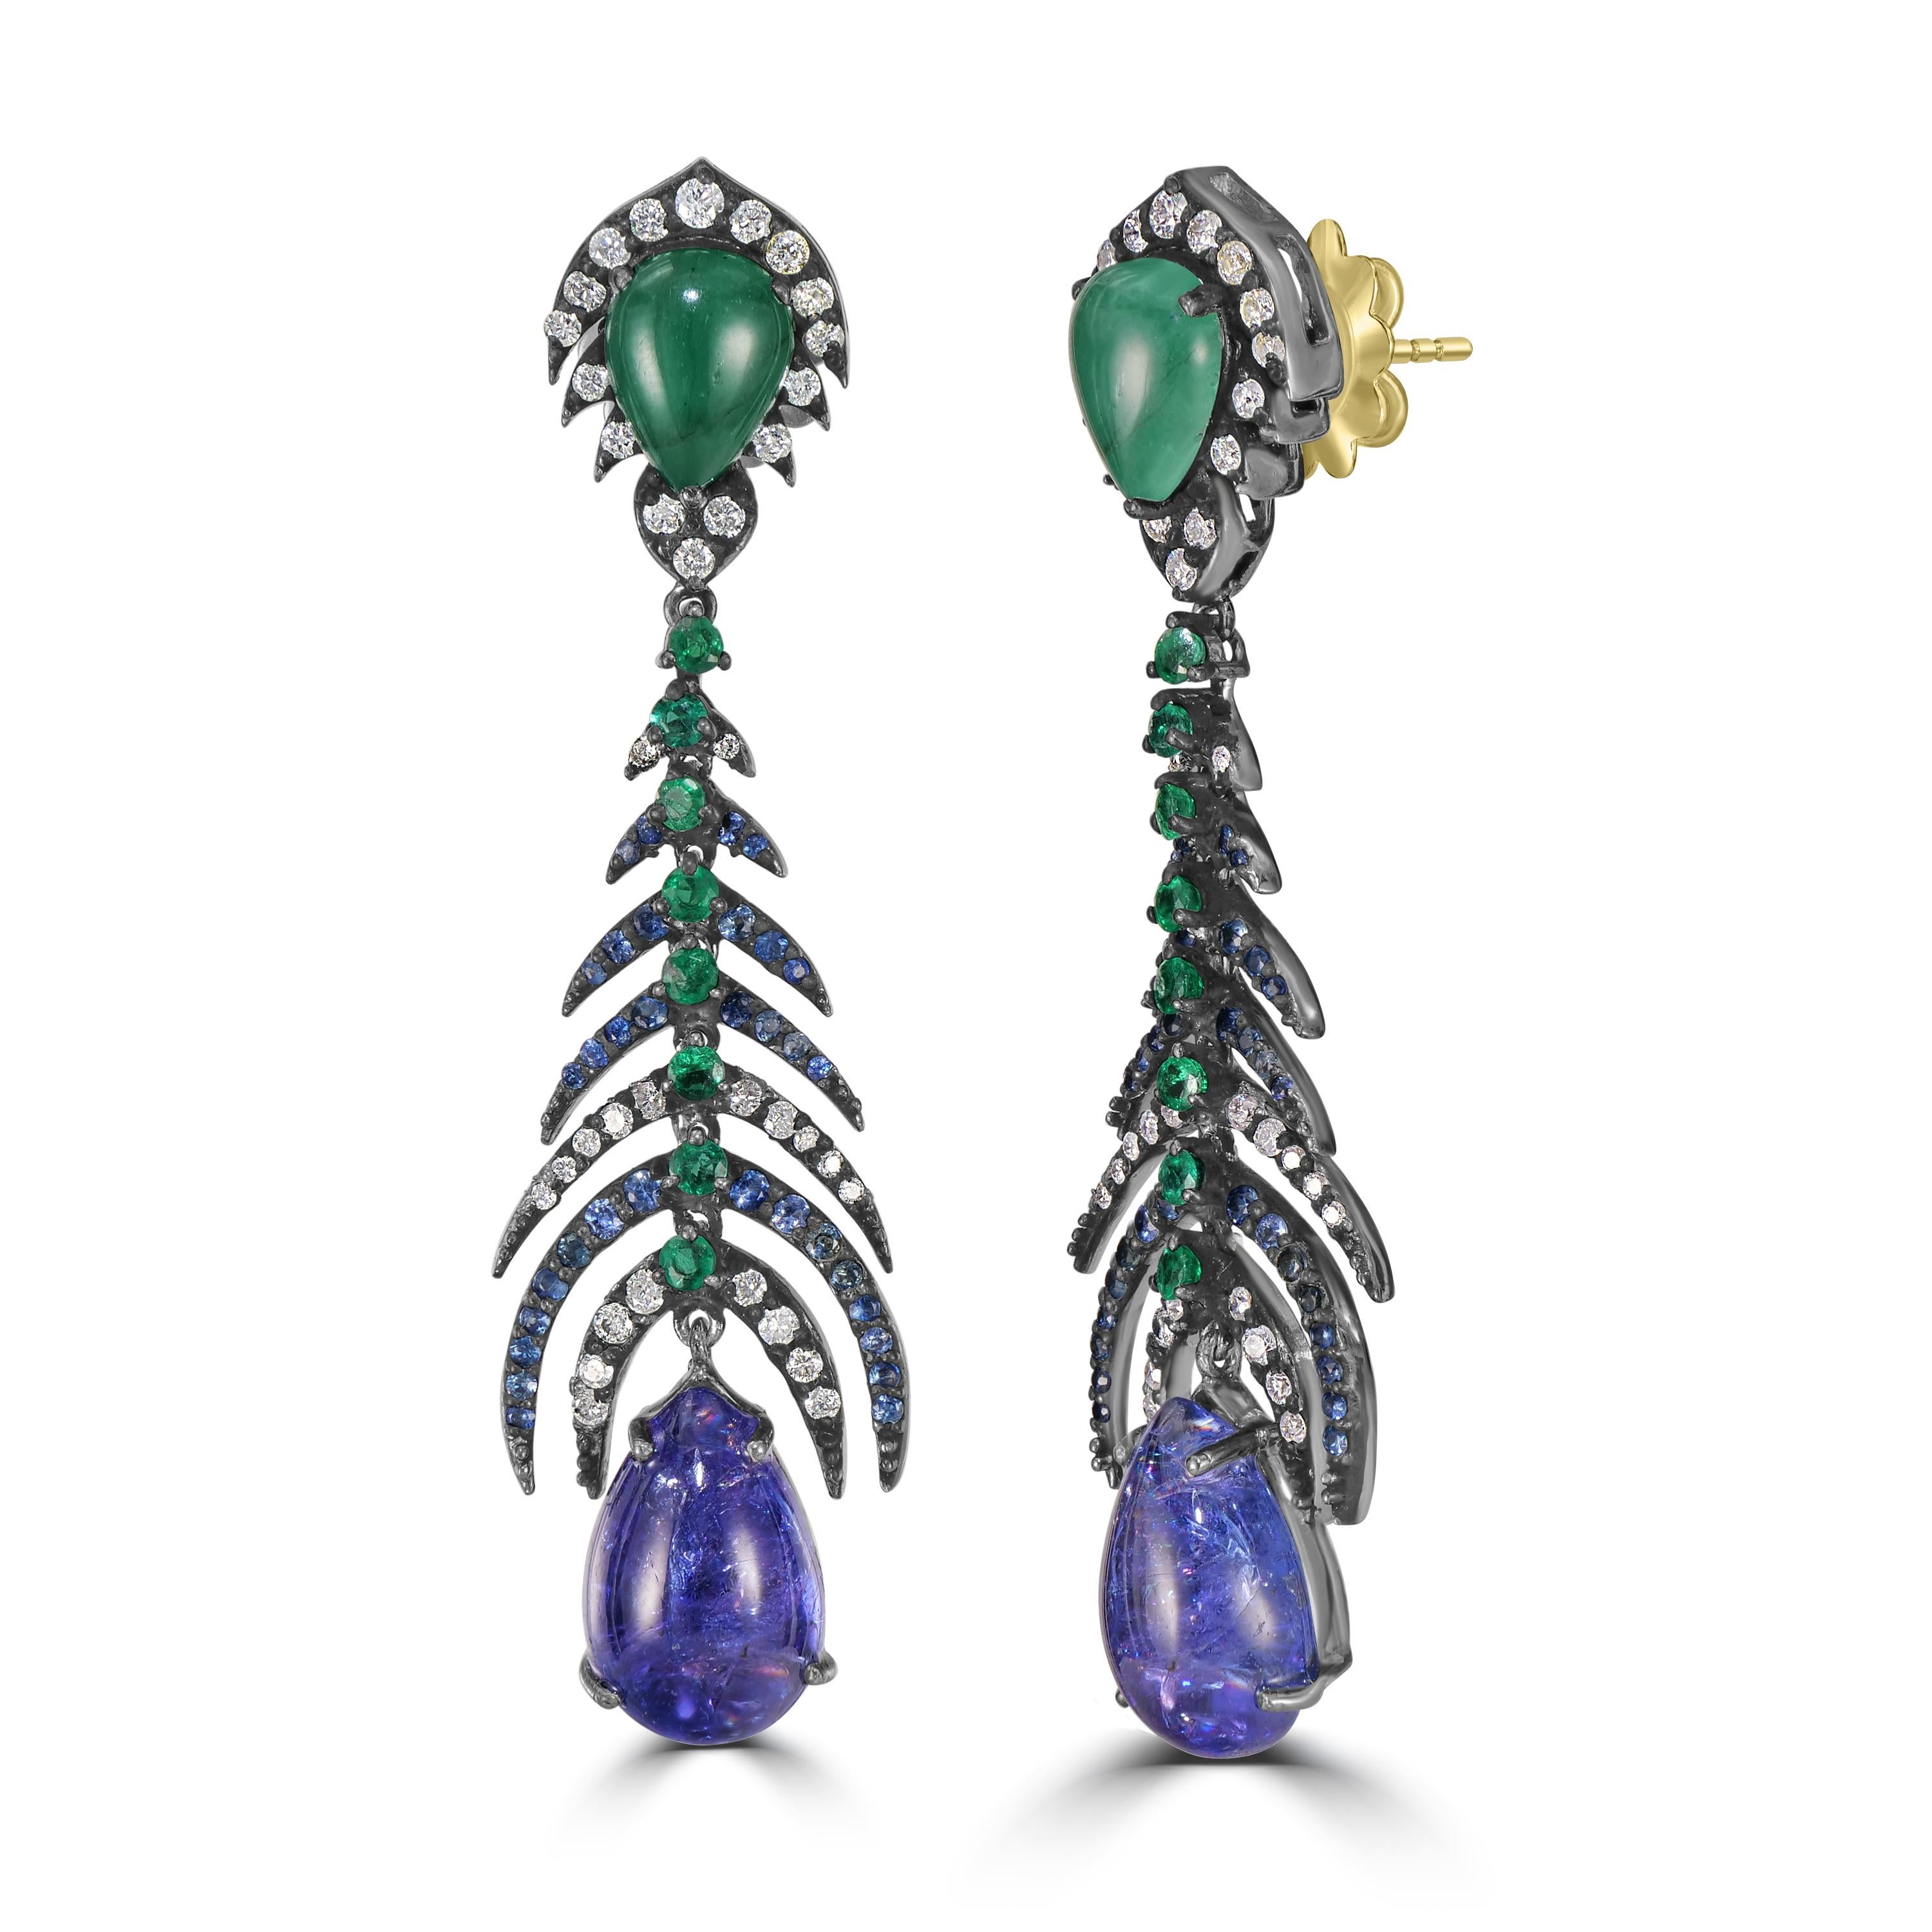 Behold the opulent Victorian 17.92 Cttw. Tanzanite, Diamond, Emerald, and Sapphire Dangle Earrings—an artistic symphony of precious gems and intricate design that commands attention and admiration.

The journey of elegance begins with the pear